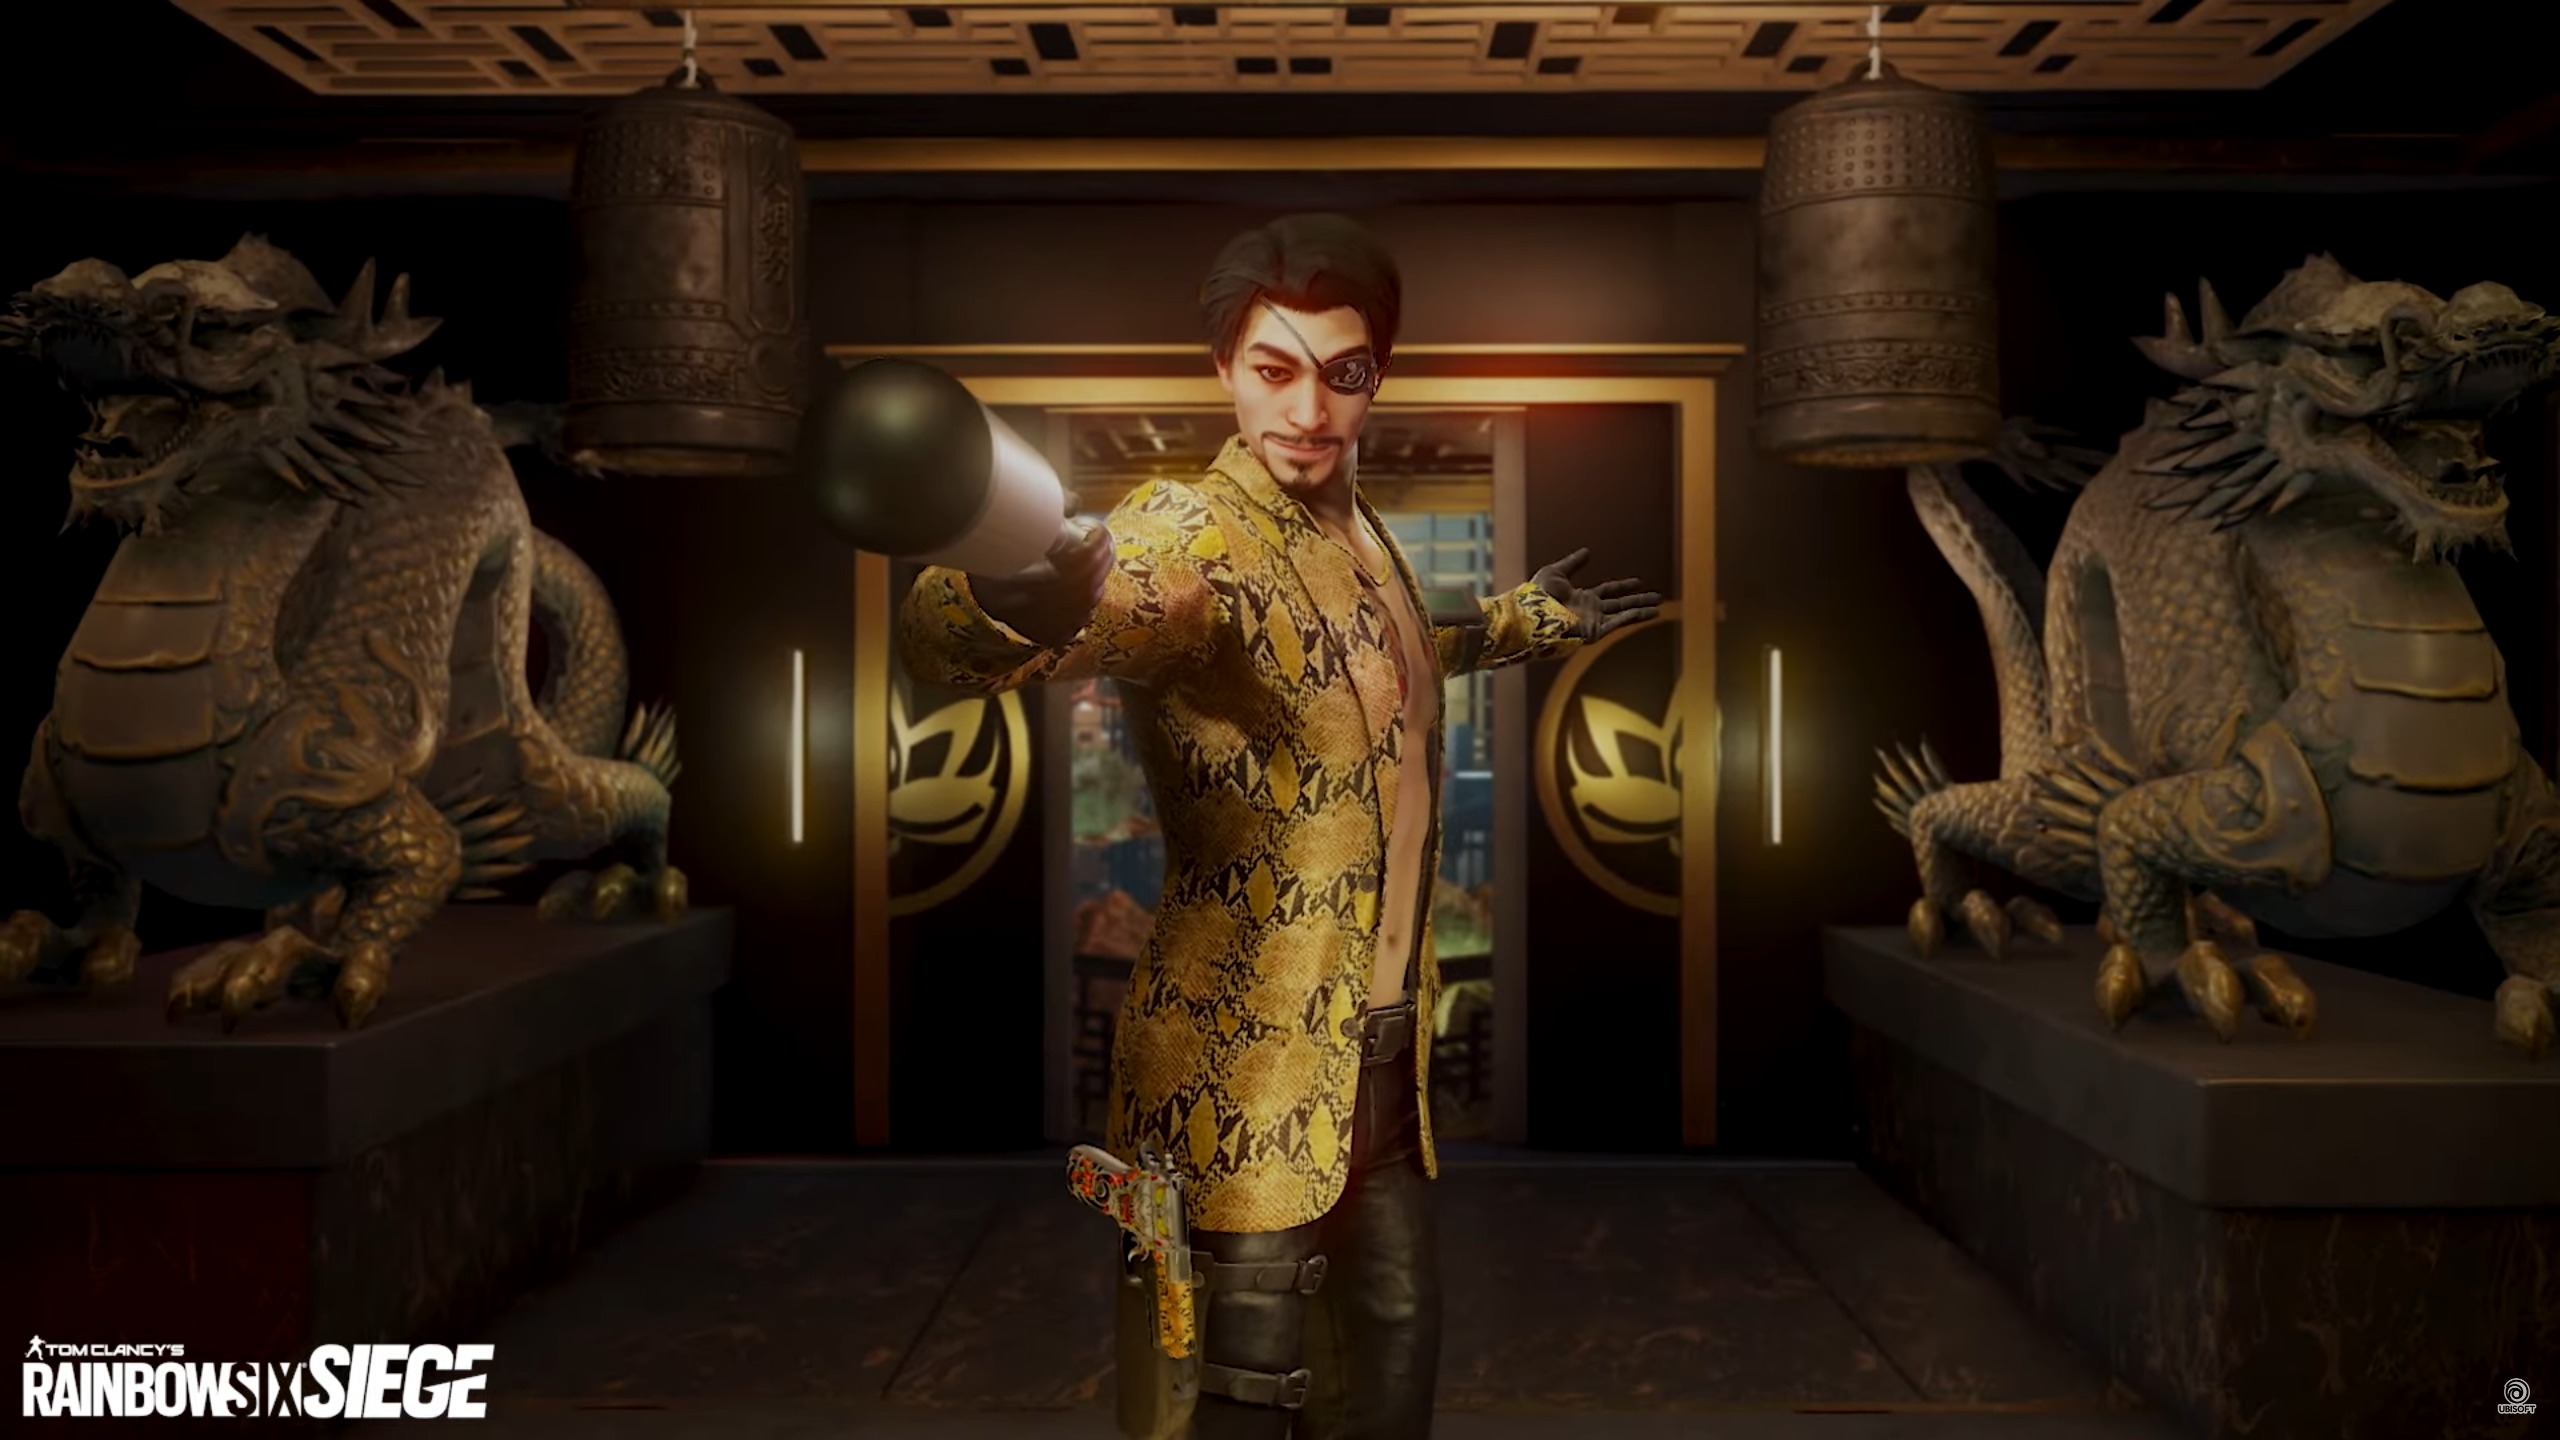 All skins and accessories included in the Majima Goro Elite bundle in Rainbow Six Siege